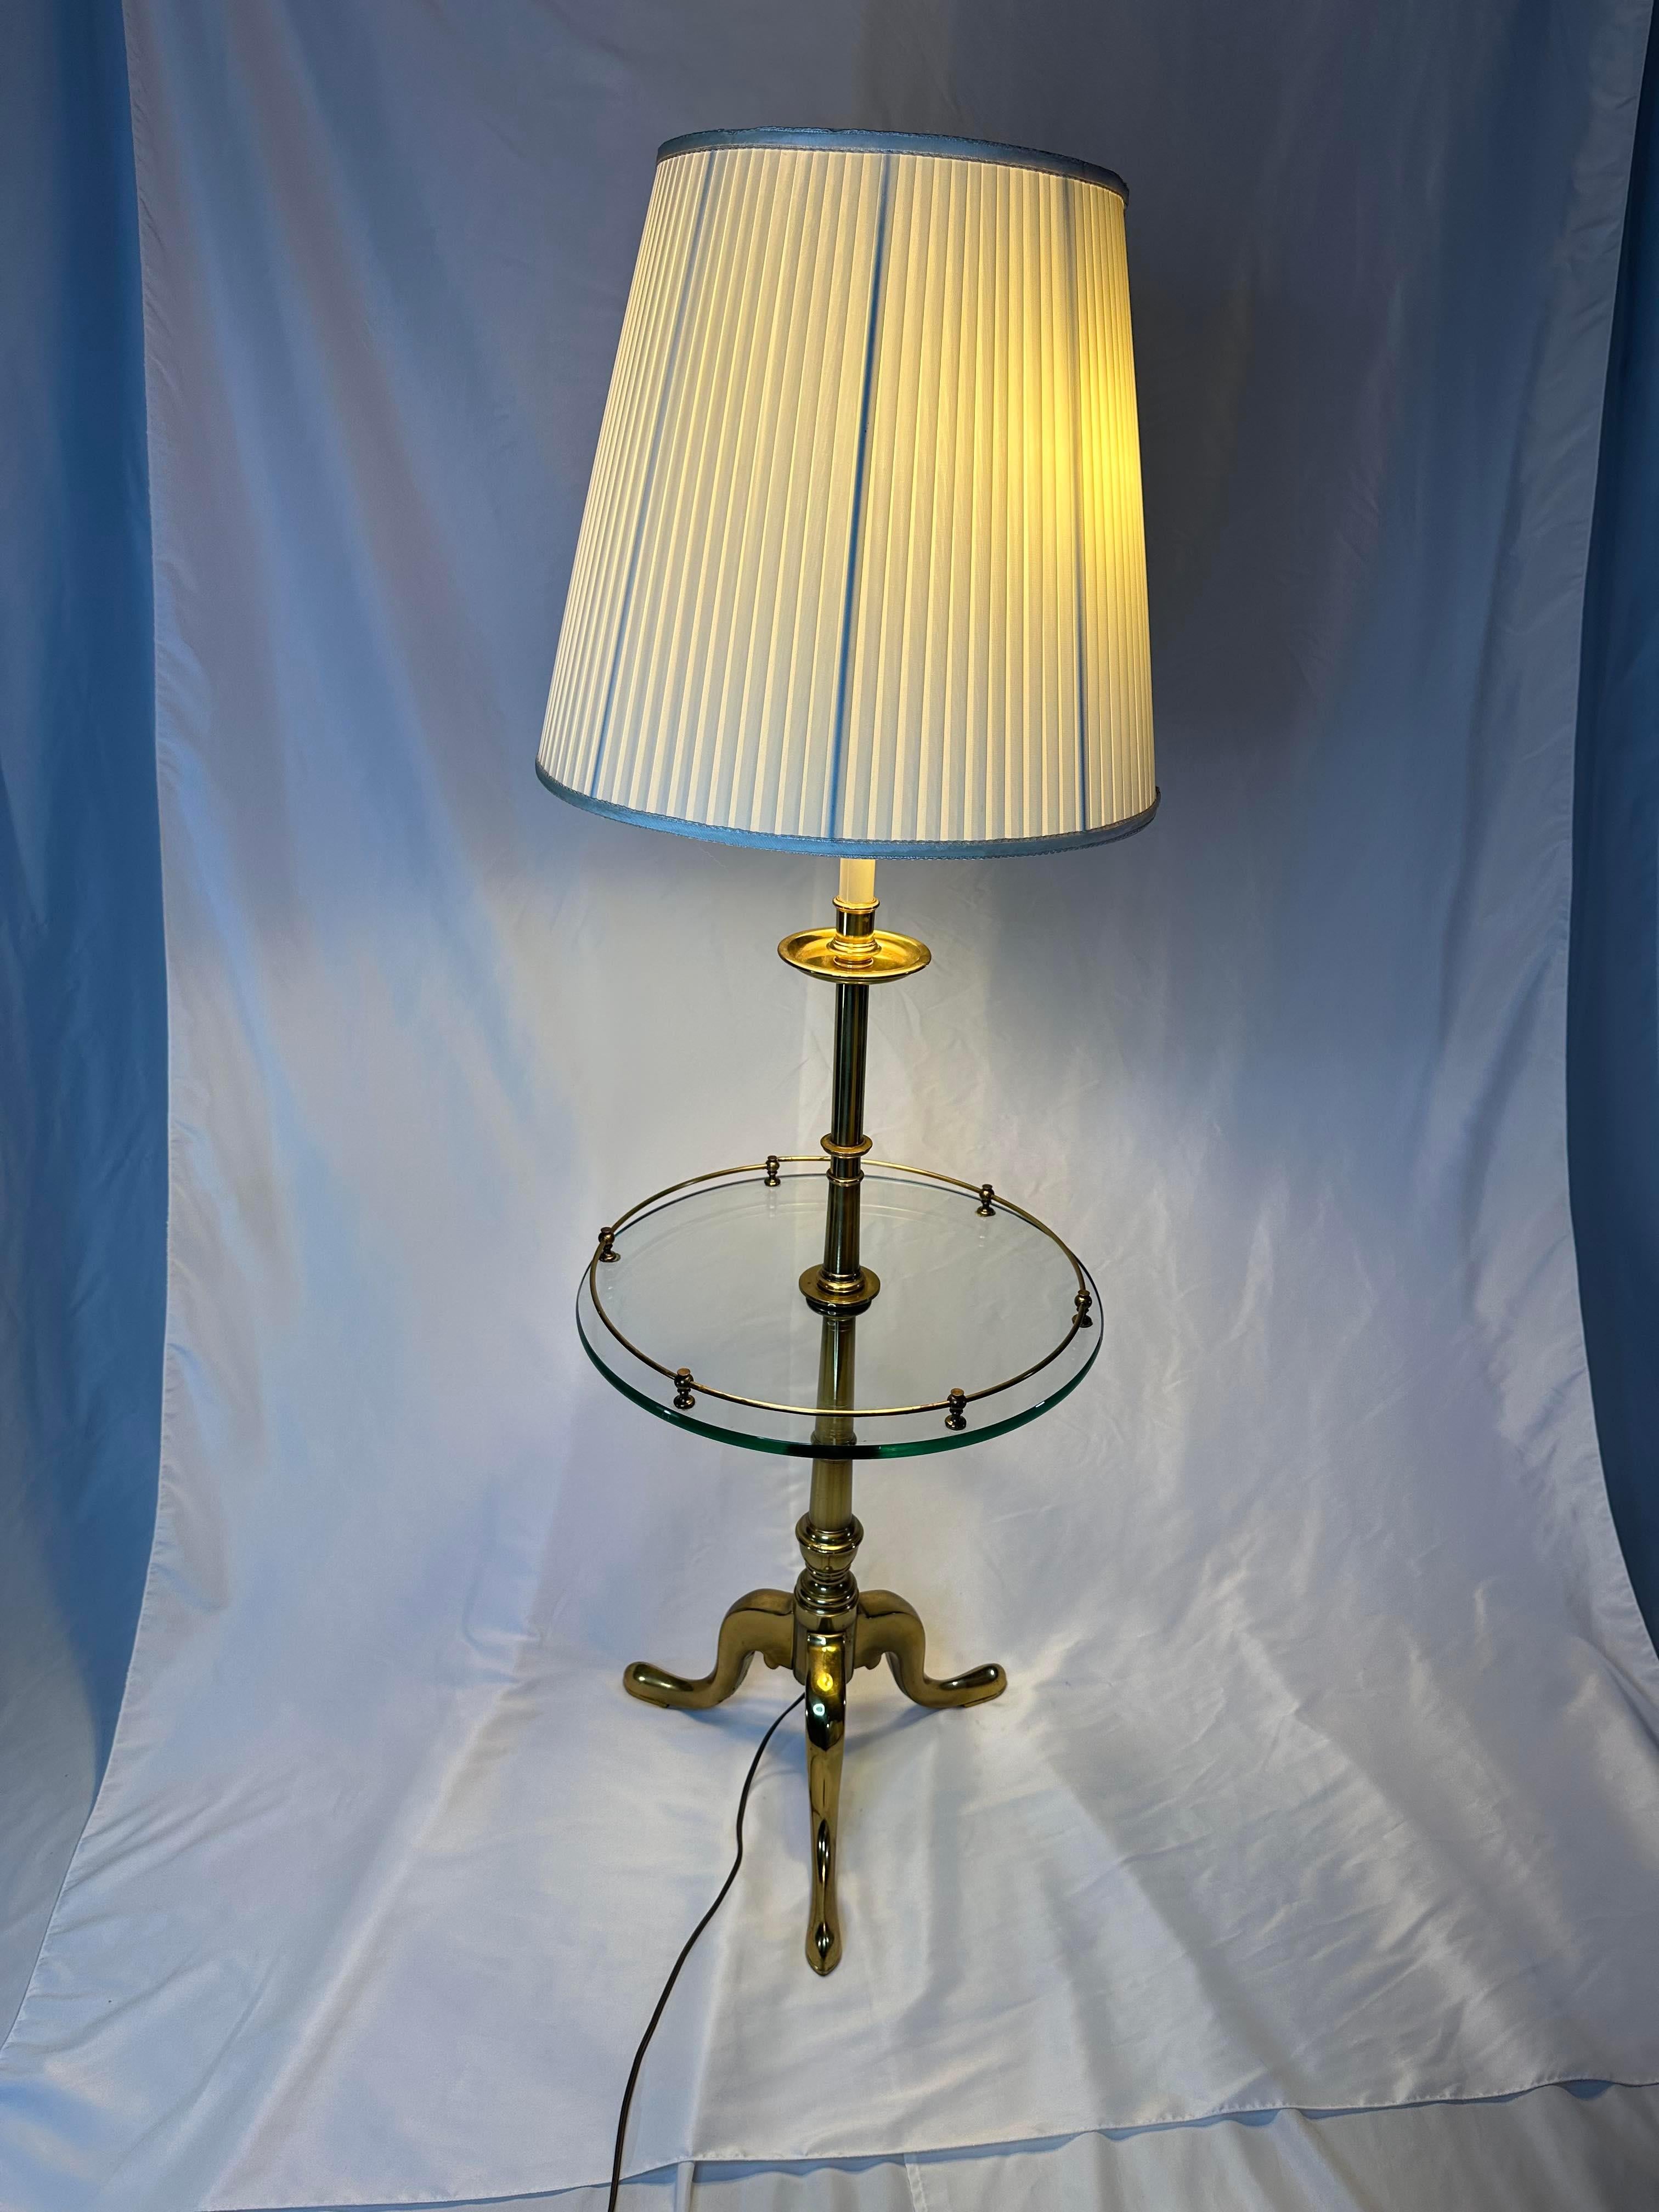 French Provincial Stiffel Floor Lamp With Glass Table and tripod legs 29